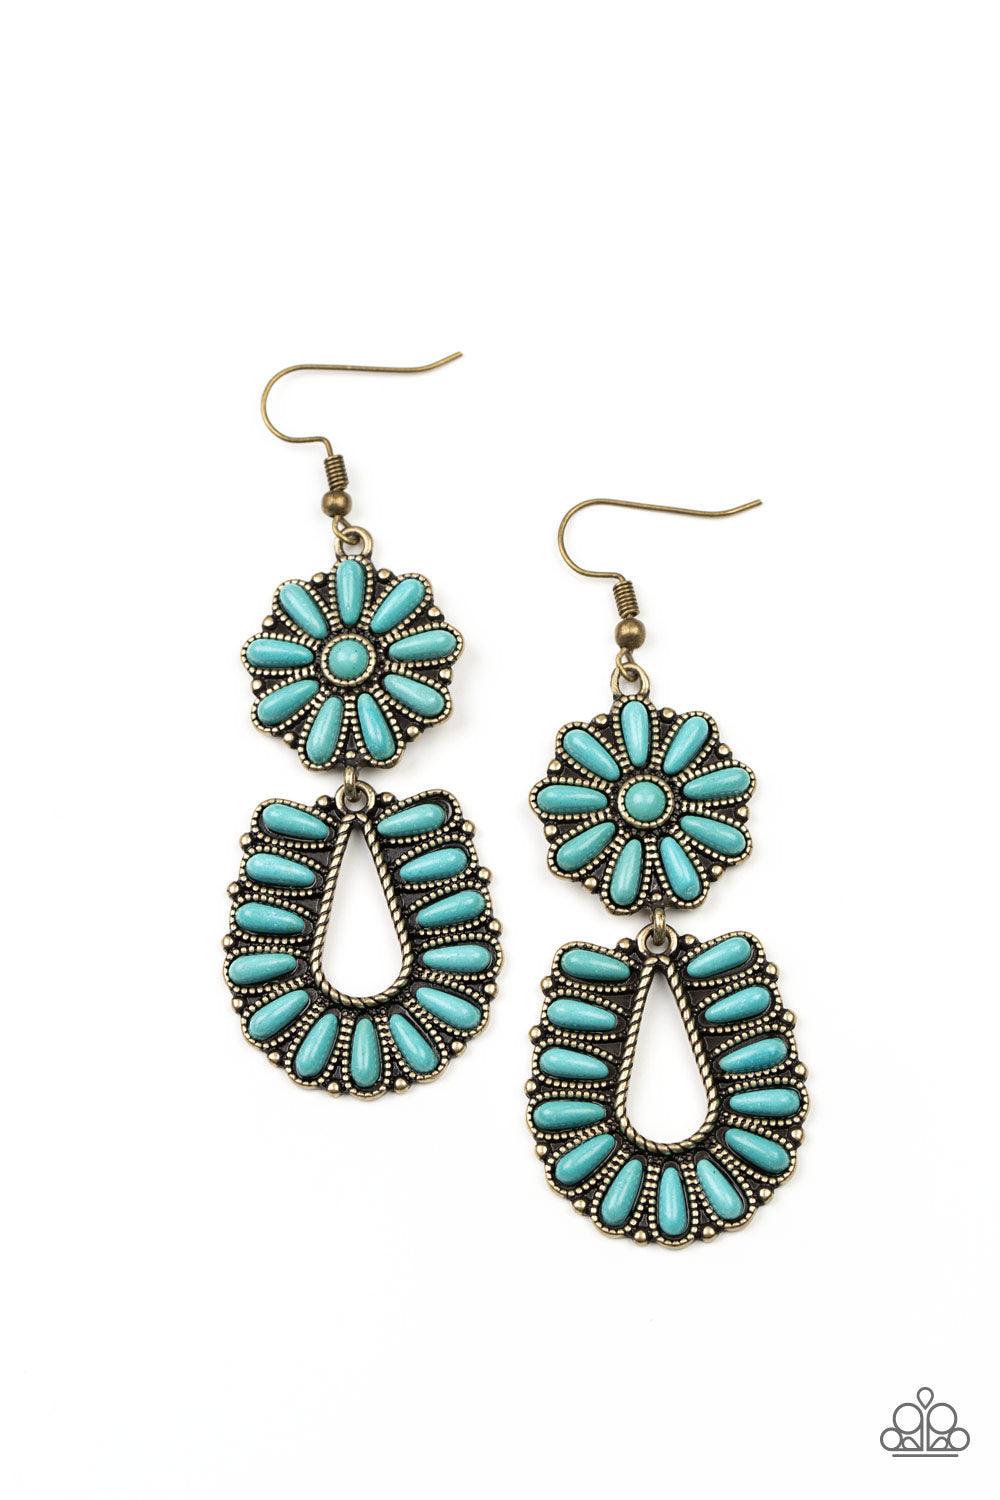 Paparazzi Accessories Badlands Eden - Brass Infused with studded brass fittings, two turquoise stone frames connect into a squash blossom for an authentically southwestern inspired look. Earring attaches to a standard fishhook fitting. Sold as one pair of